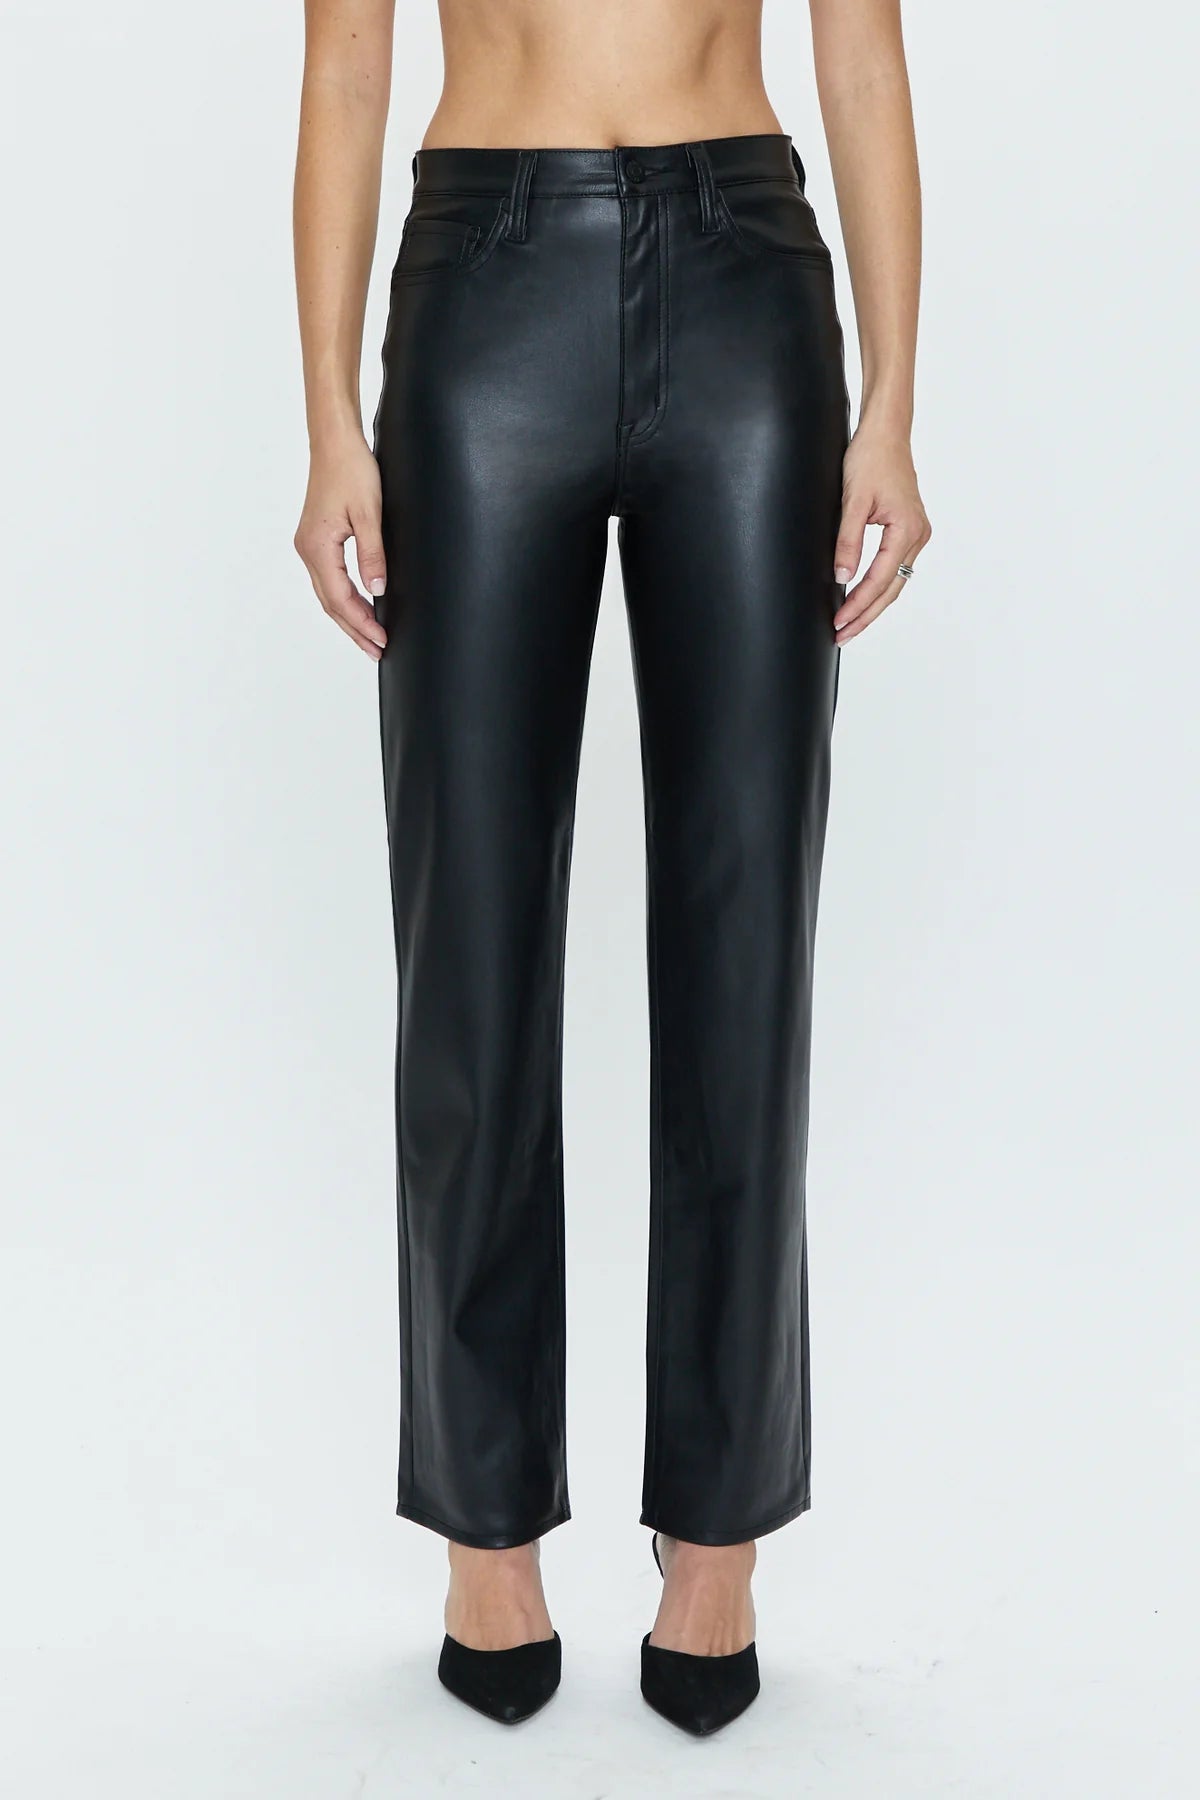 Cassie Super High Rise Straight - Slate Black - ONFEMME By Lindsey's Kloset